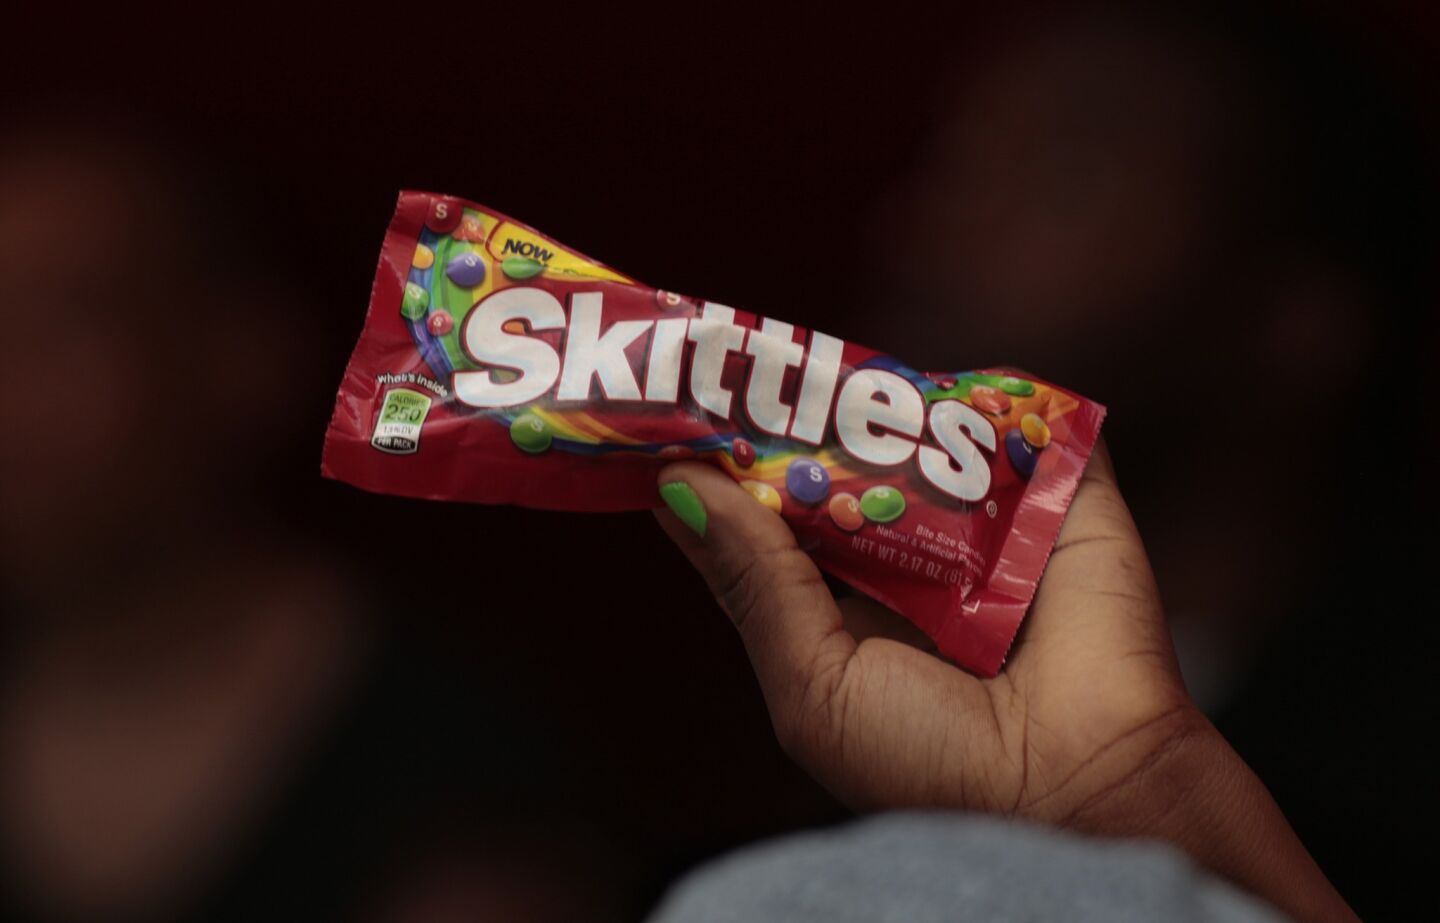 A protestor holds up a bag of Skittles. At the time of Trayvon Martin's death, he was carrying a bag of Skittles and a can of tea.